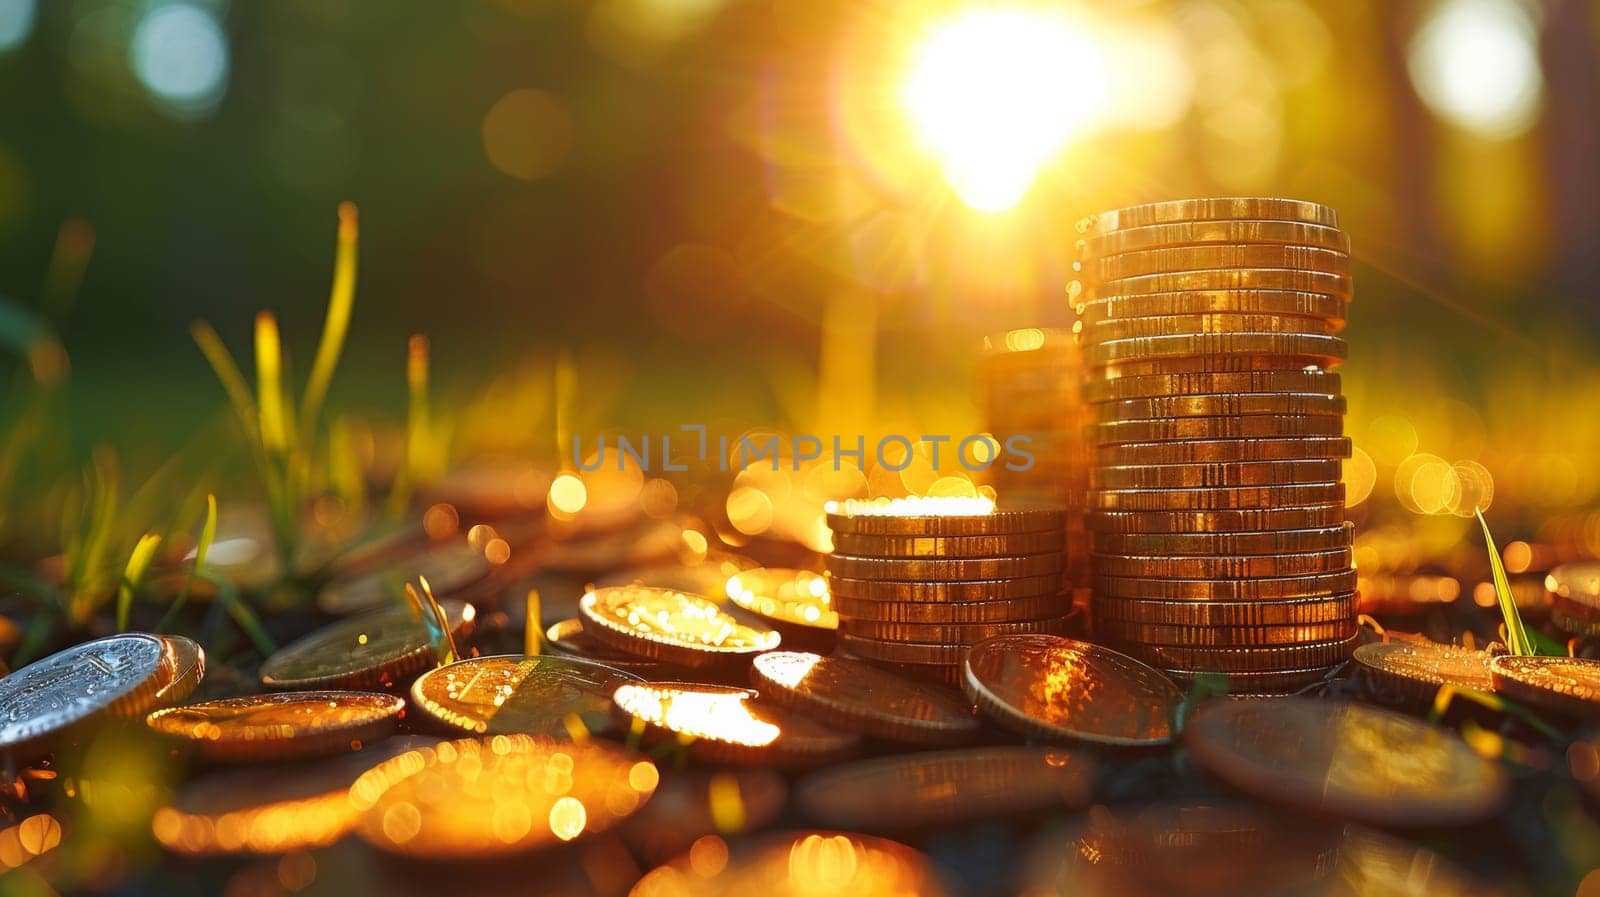 A pile of coins sitting on the ground in front of a sun